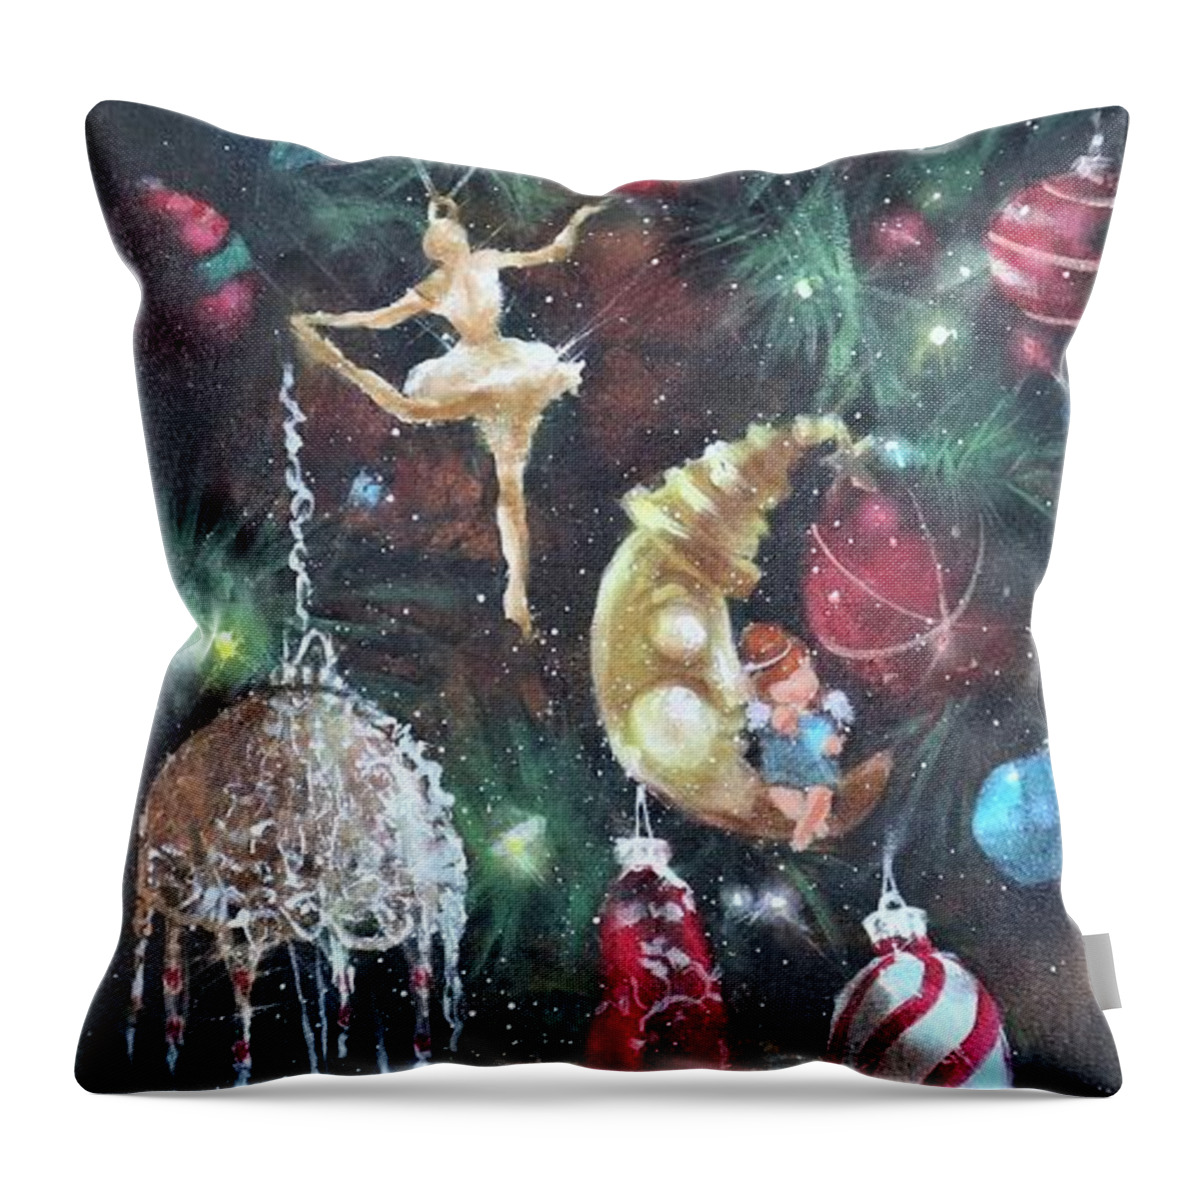  Christmas Ornaments Throw Pillow featuring the painting Favorite Things by Tom Shropshire